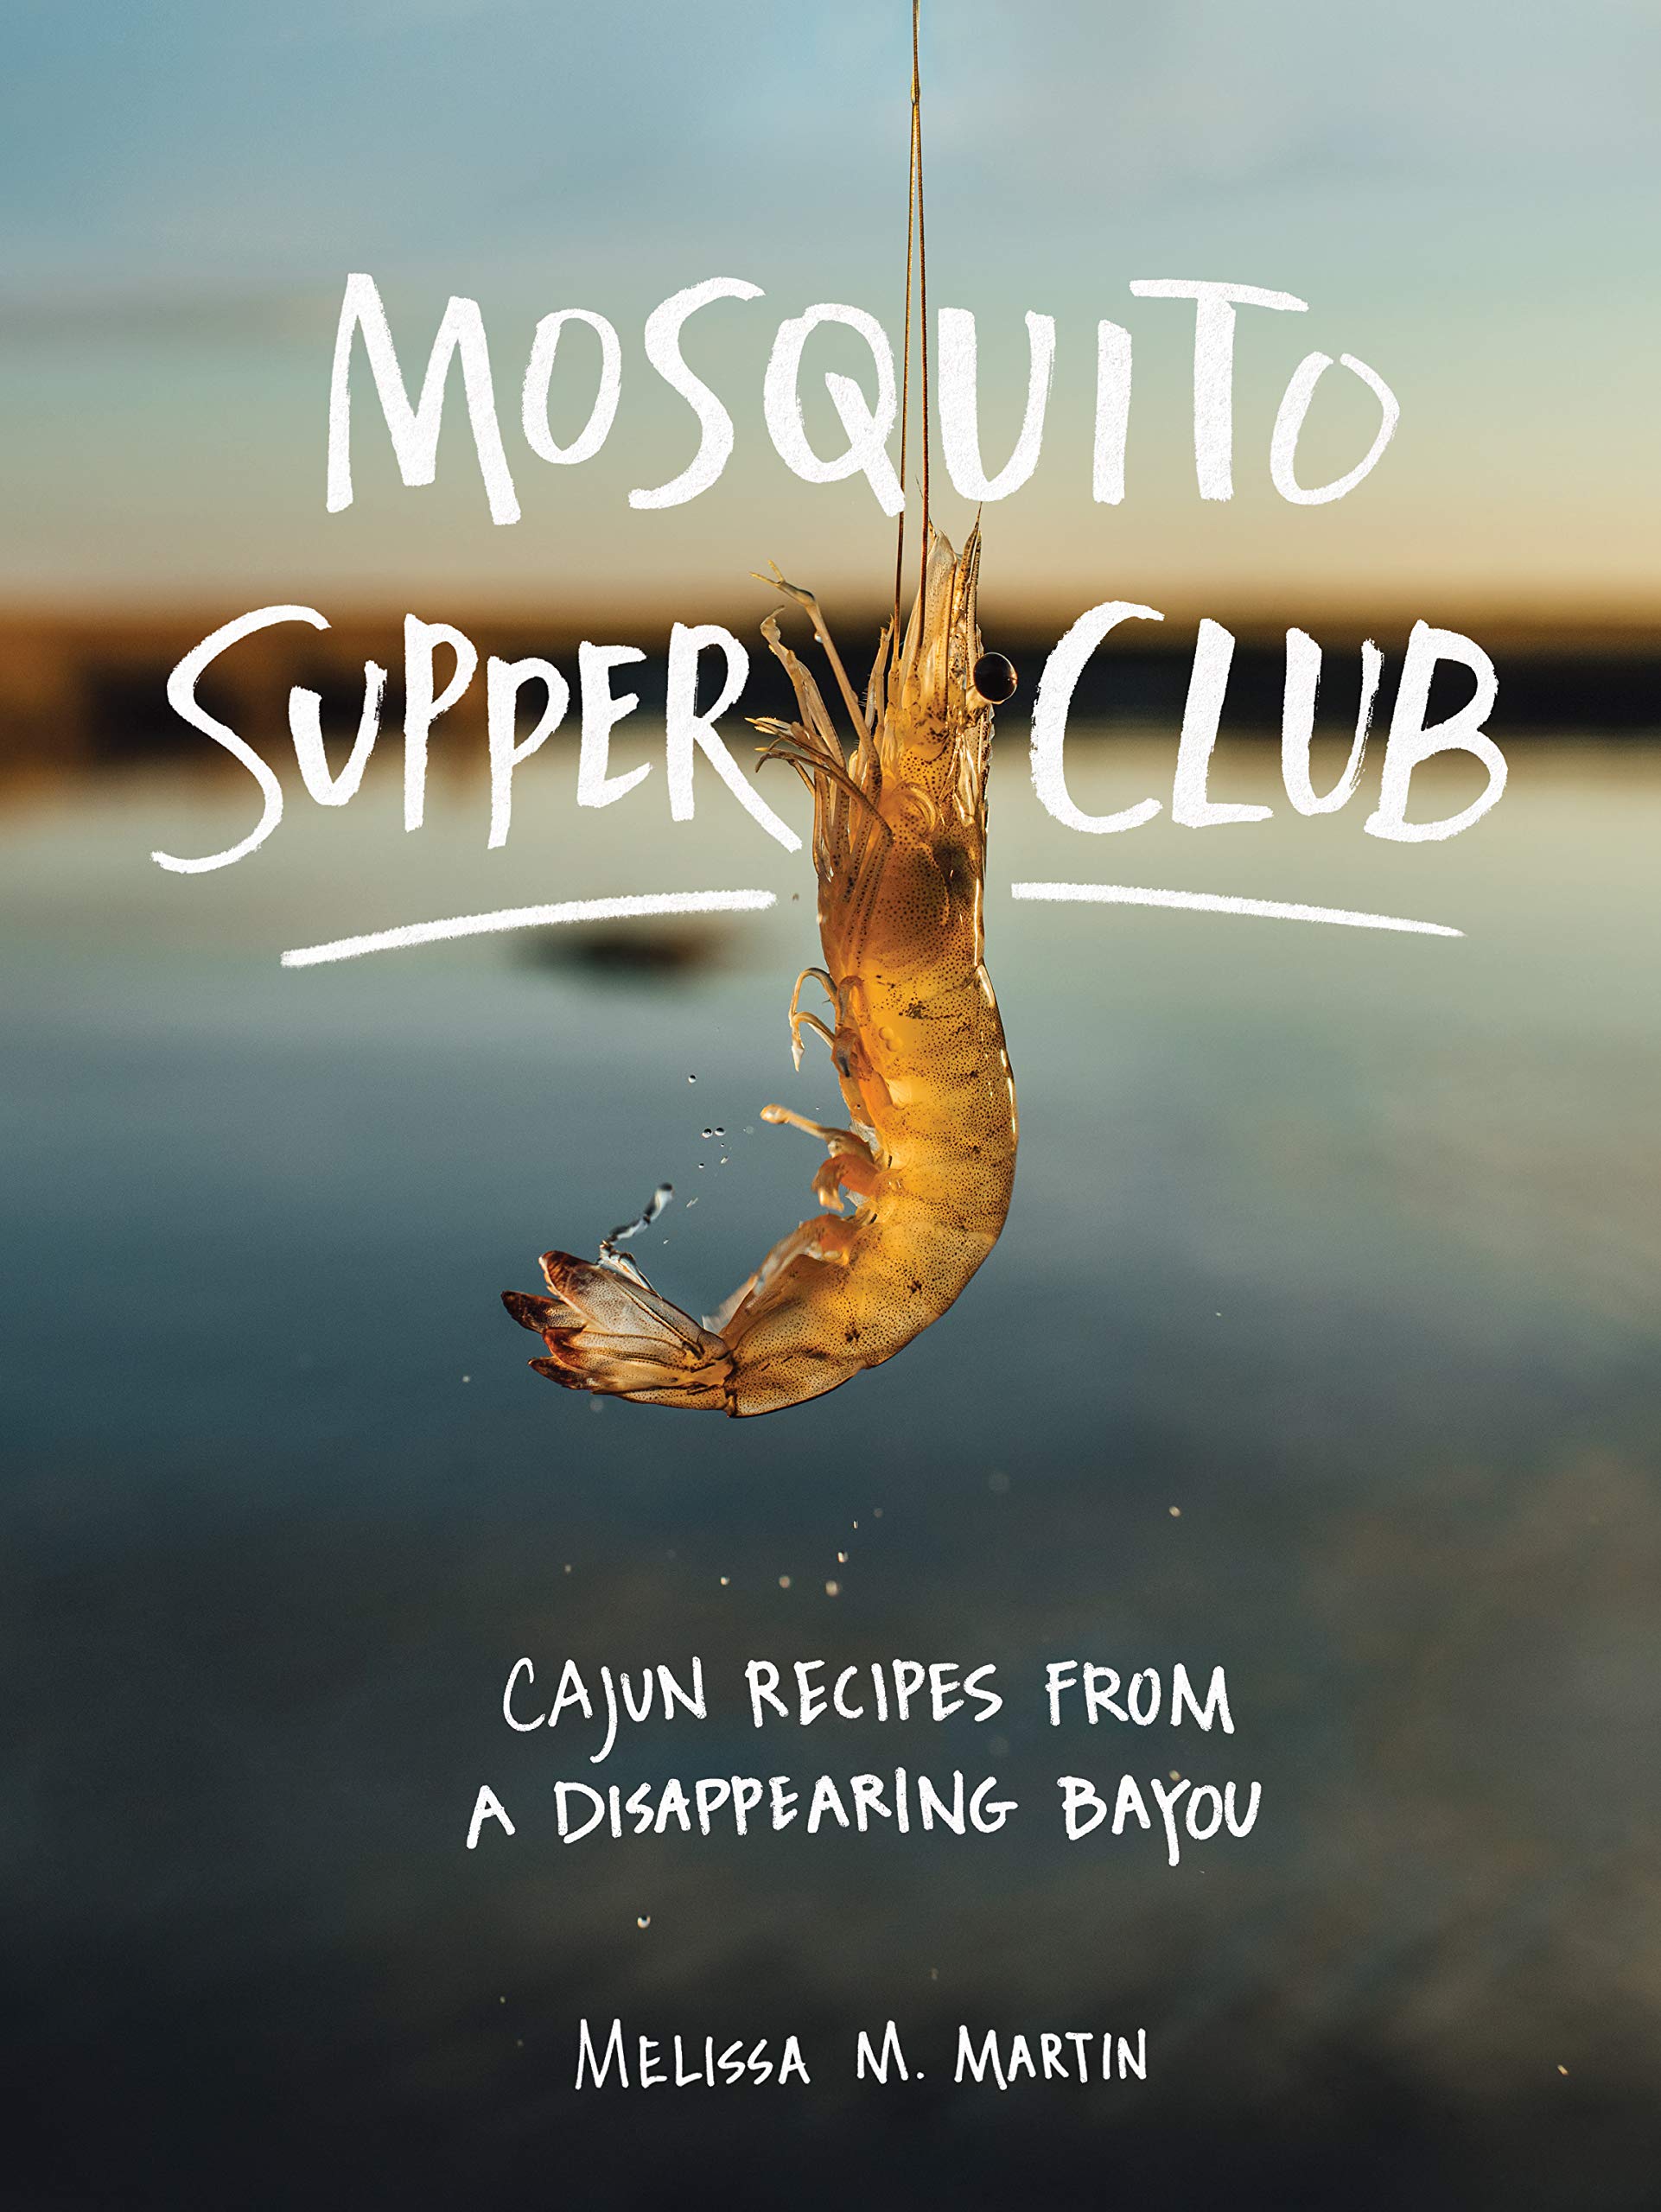 Mosquito Supper Club: Cajun Recipes from a Disappearing Bayou (Hardcover Cookbook) $6.29 + Free Shipping w/ Prime or on $35+